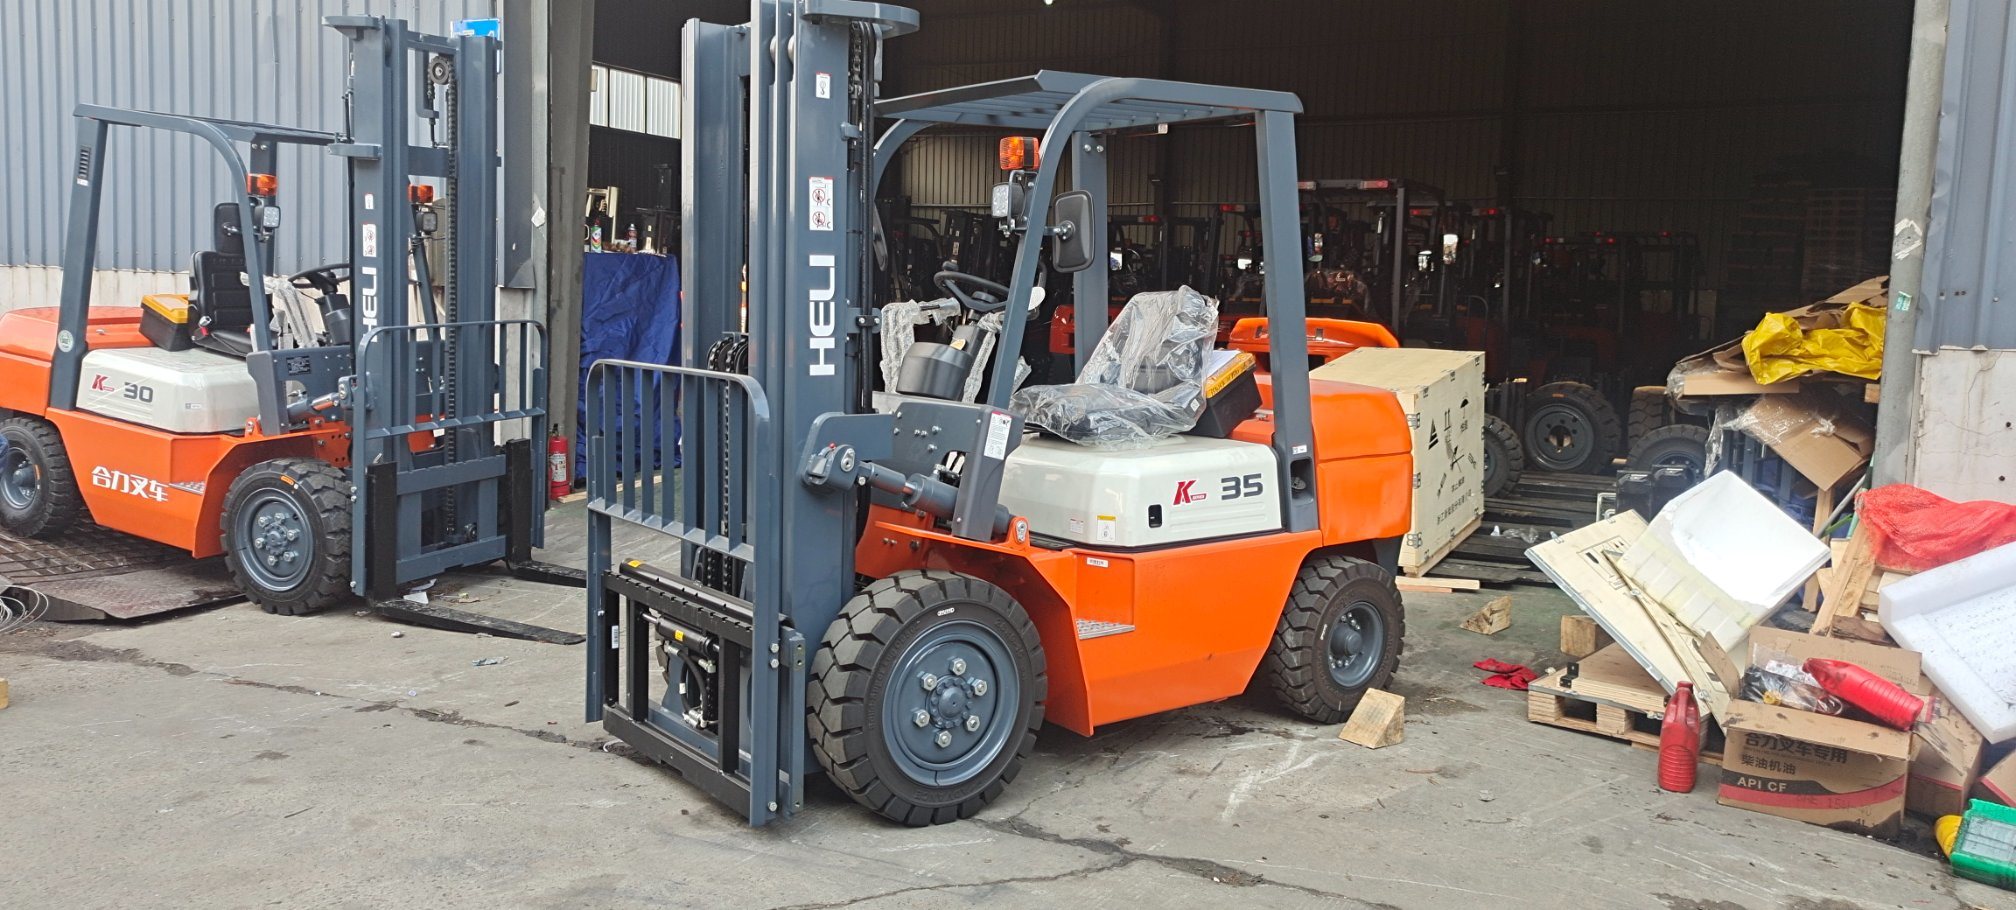 Cpcd35 3.5 Ton Diesel Forklift Truck for Sale